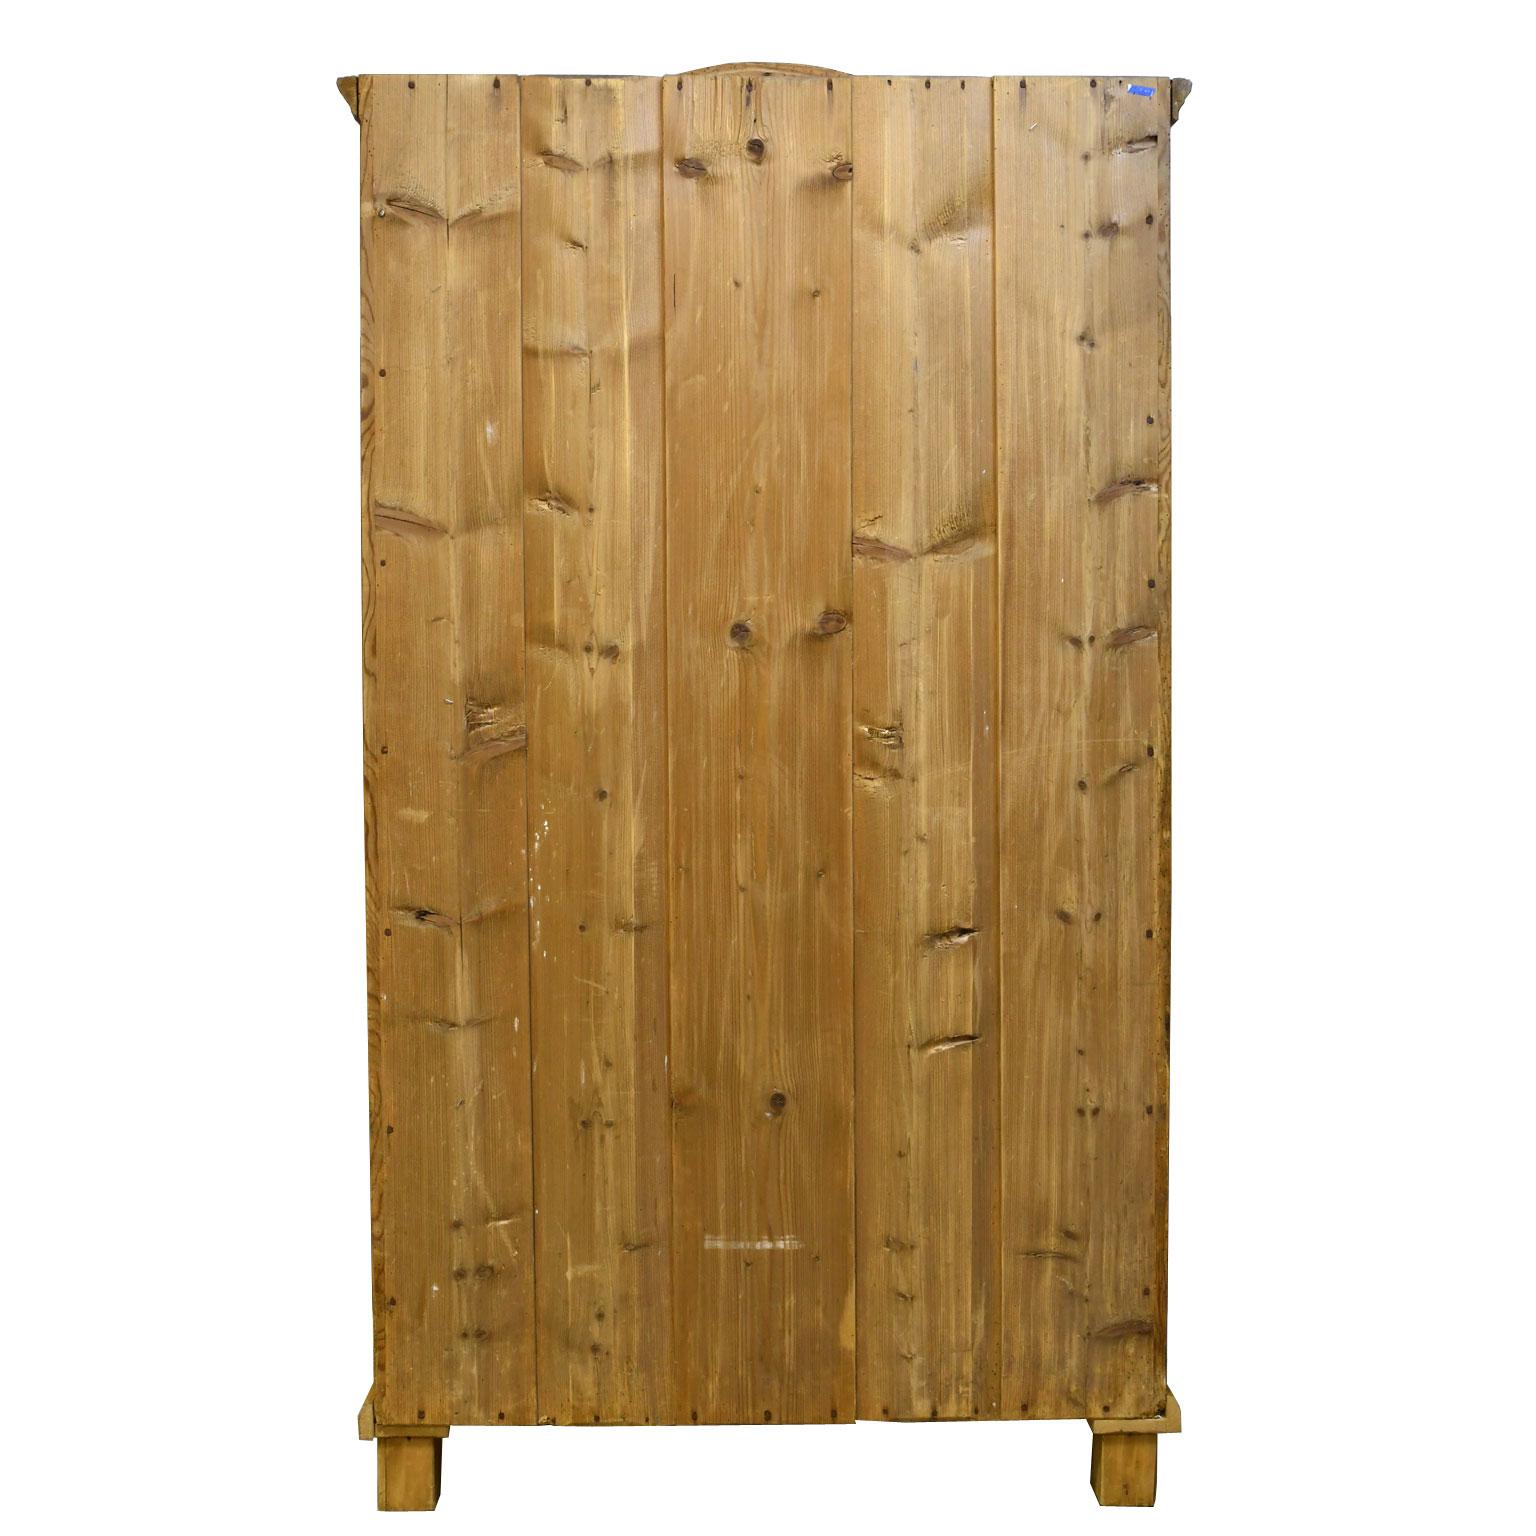 Rustic Austrian Armoire in Pine with Single Door and Arched Top, circa 1830